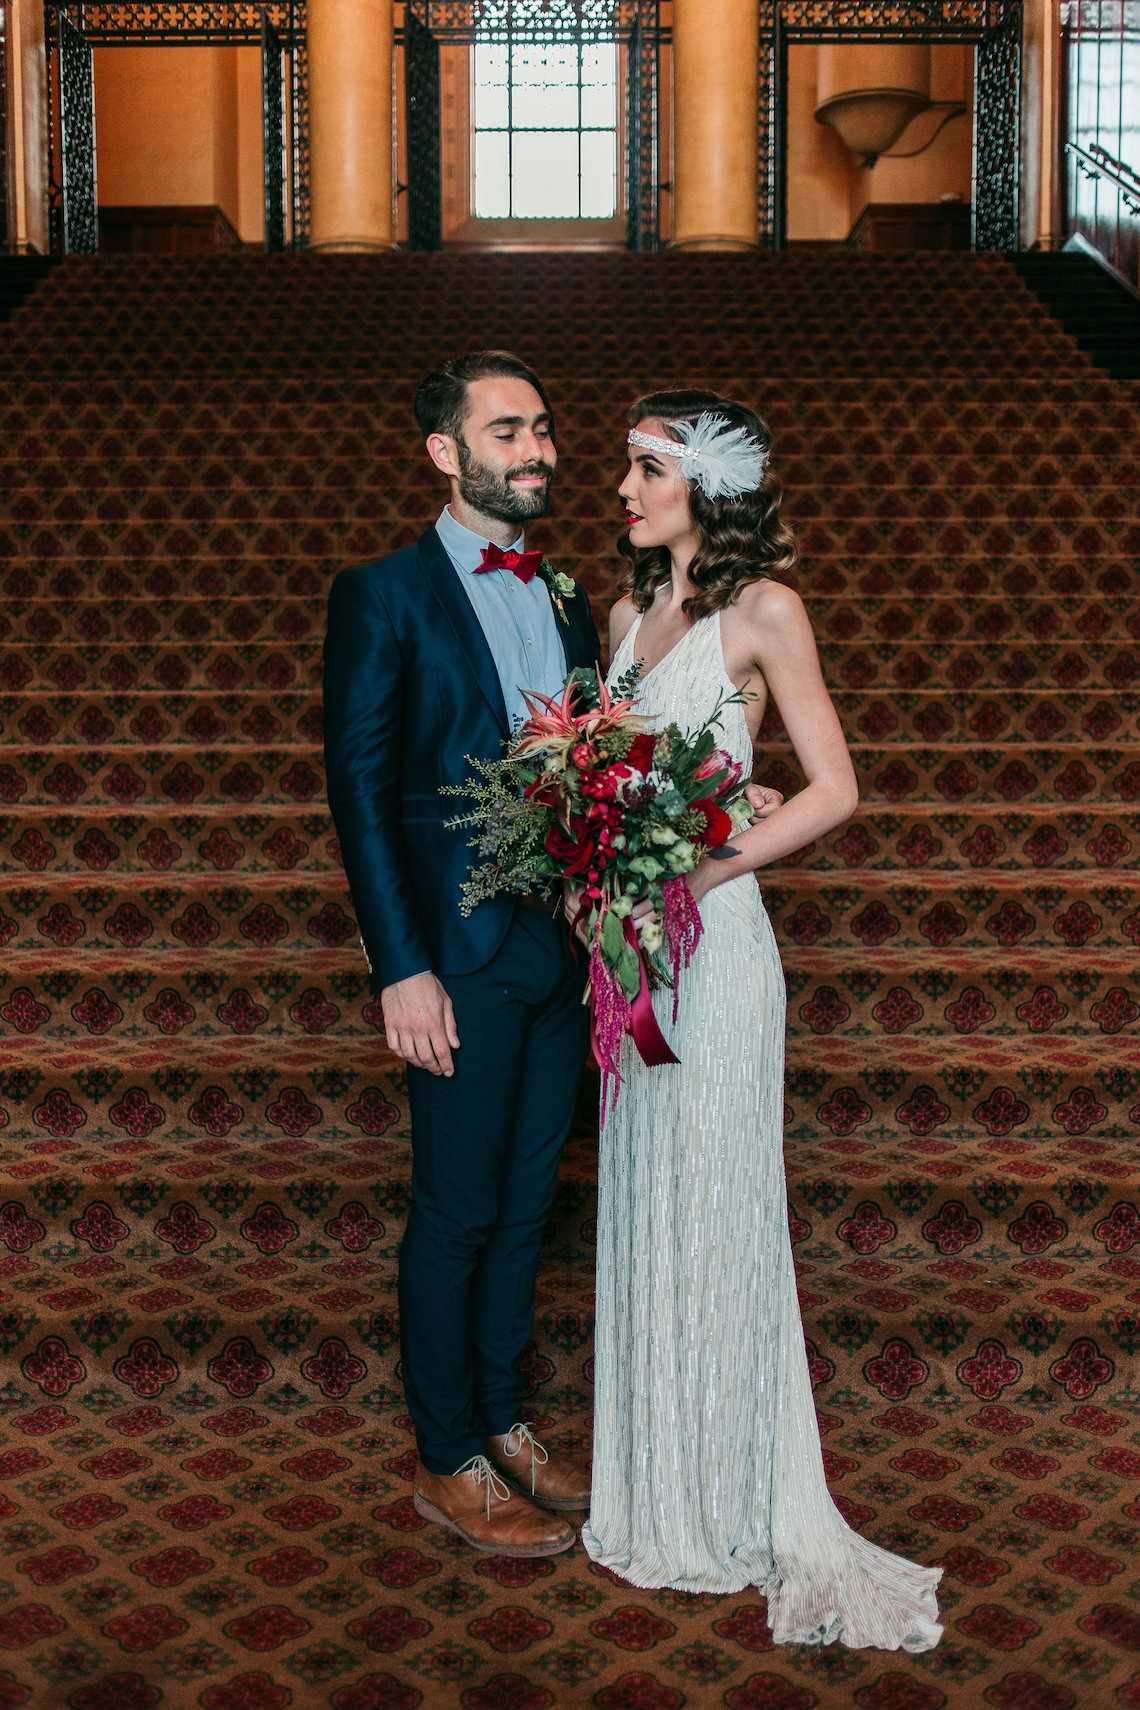 The Great Gatsby Art Deco Wedding Inspiration With Tropical Florals – Holly Castillo Photography 35